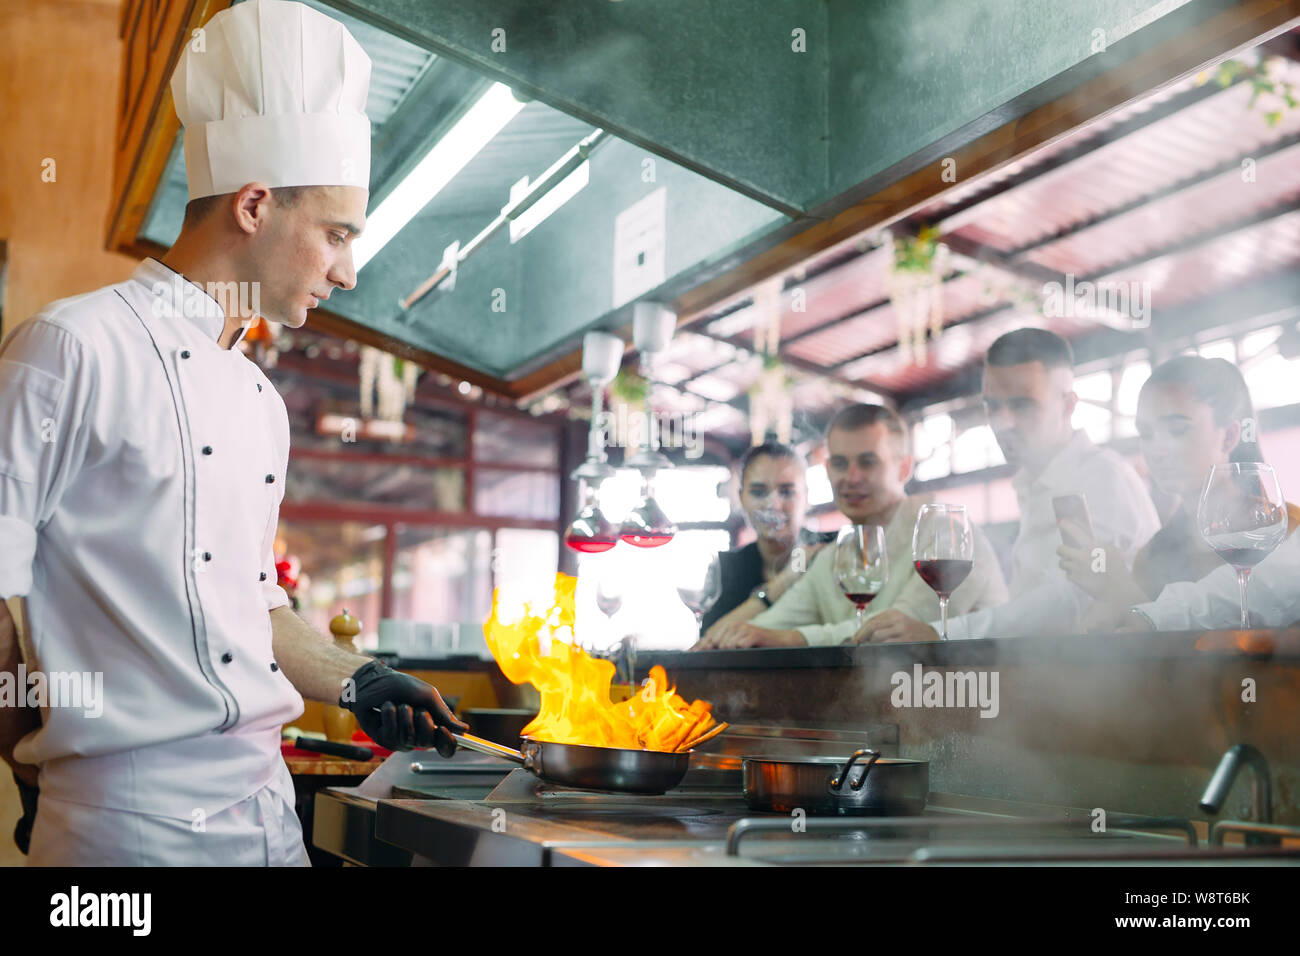 The chef prepares food in front of the visitors in the restaurant Stock Photo